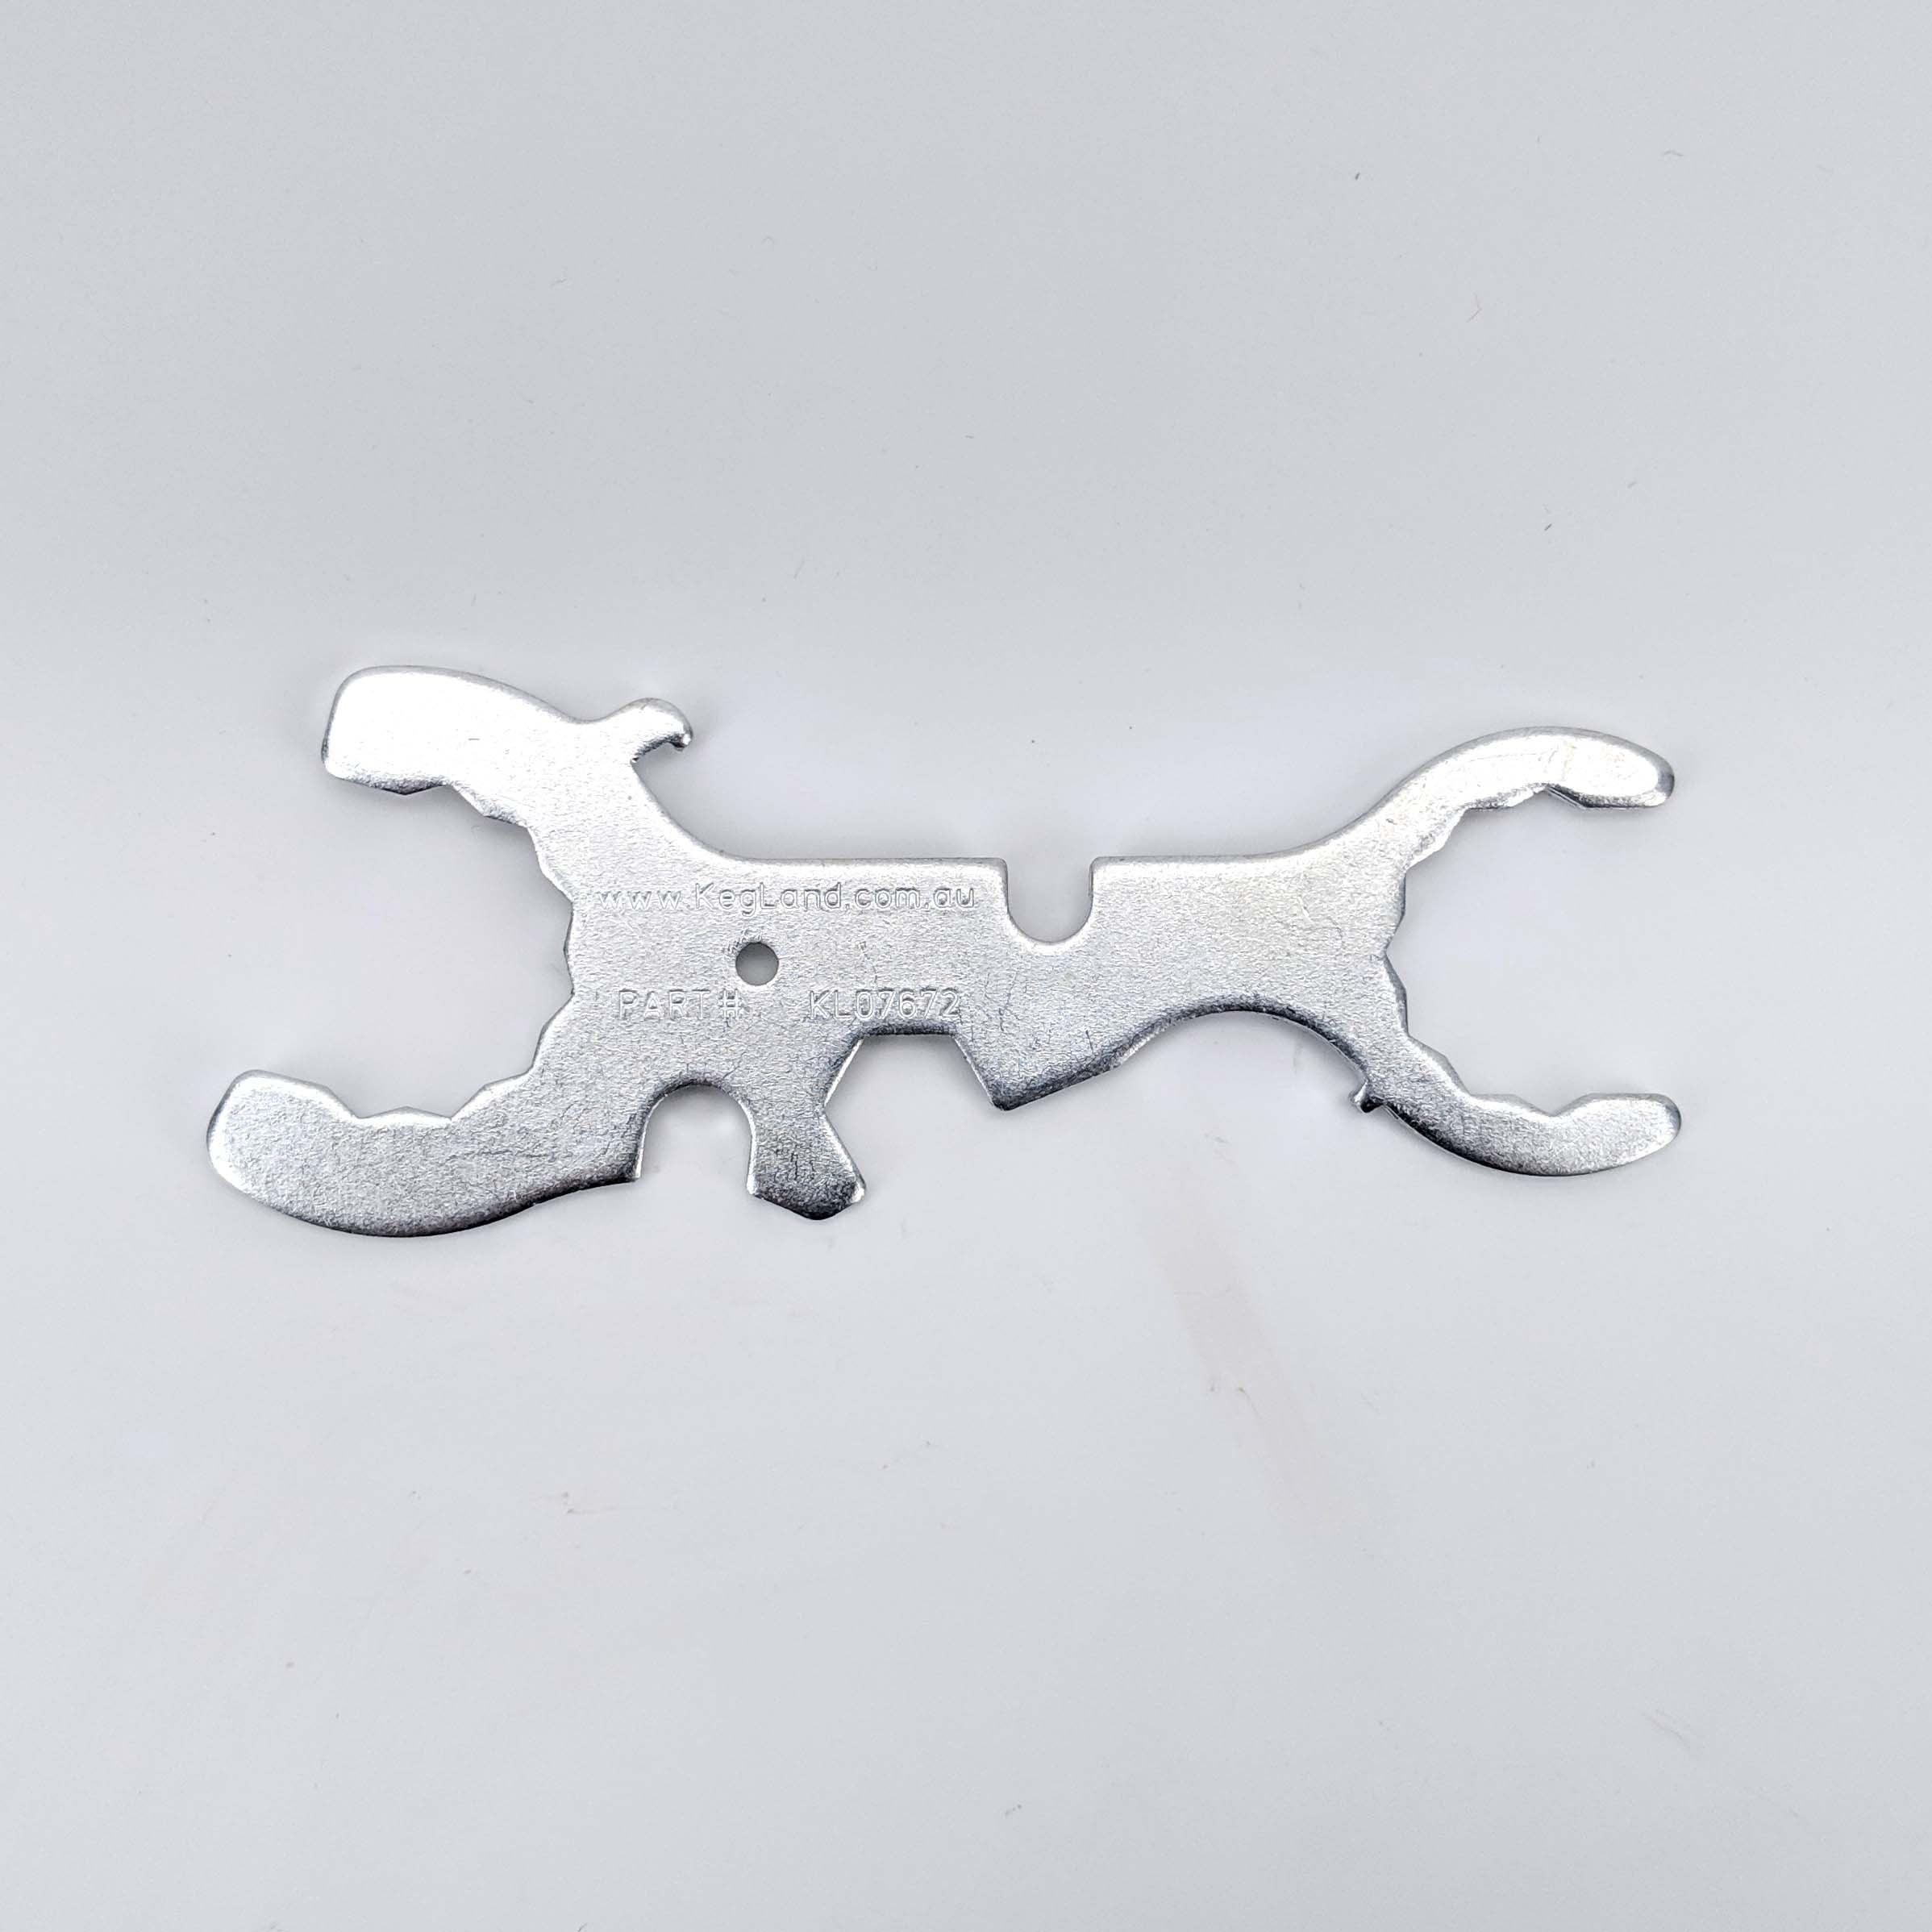 7 in 1 Faucet Spanner / Wrench Tool - KegLand